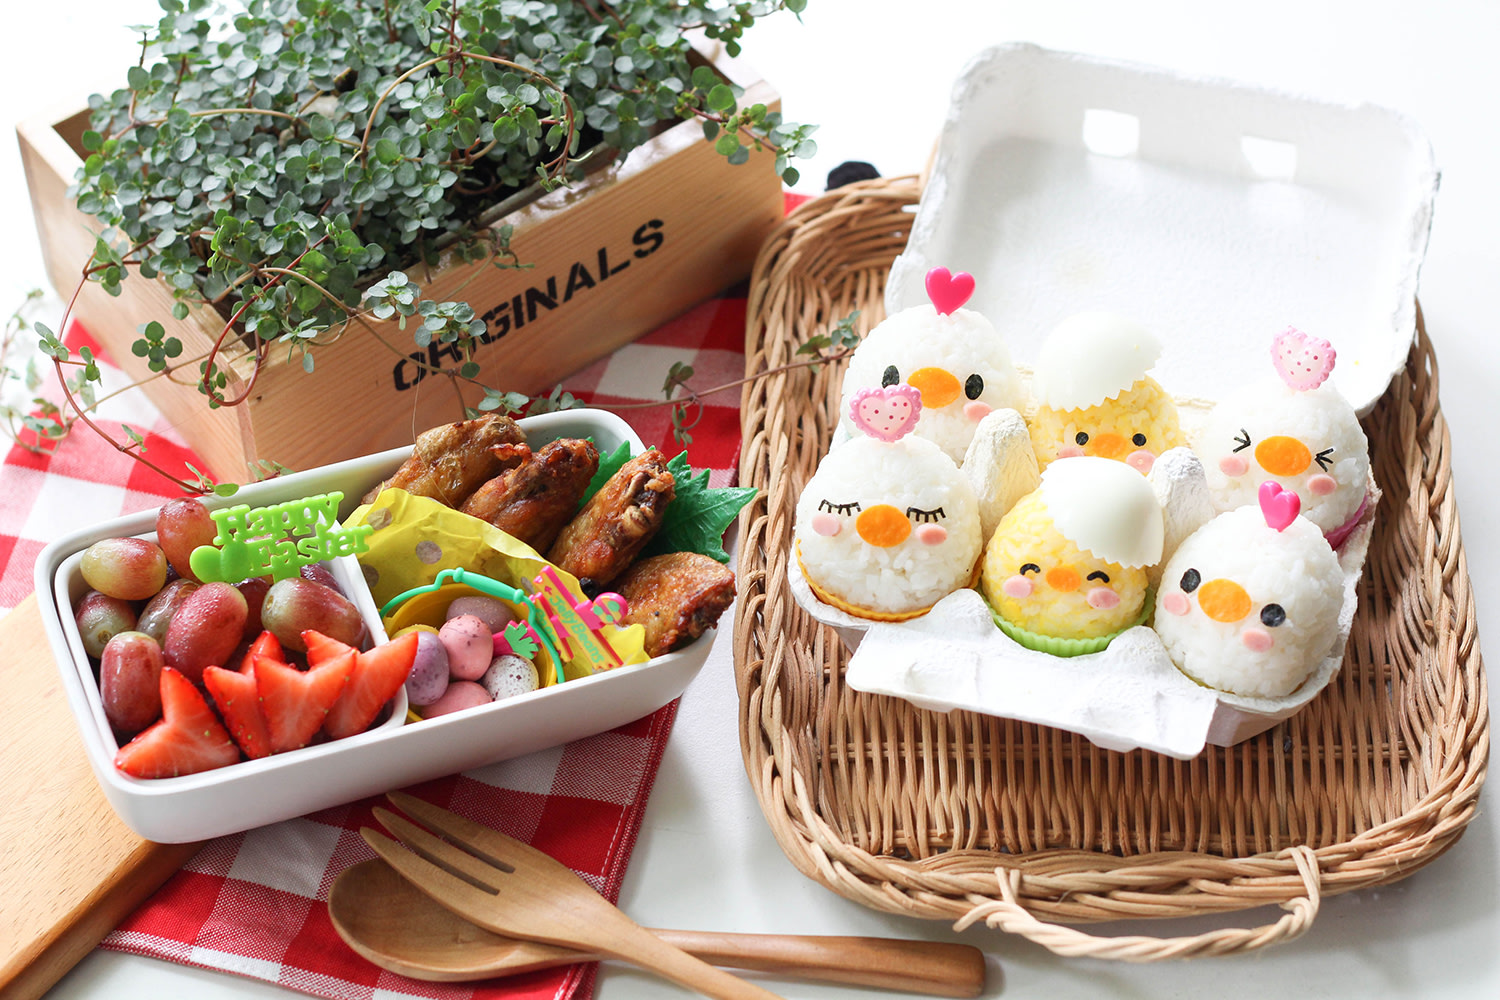 Mom Makes Adorable Bento Lunches For Her Two Sons